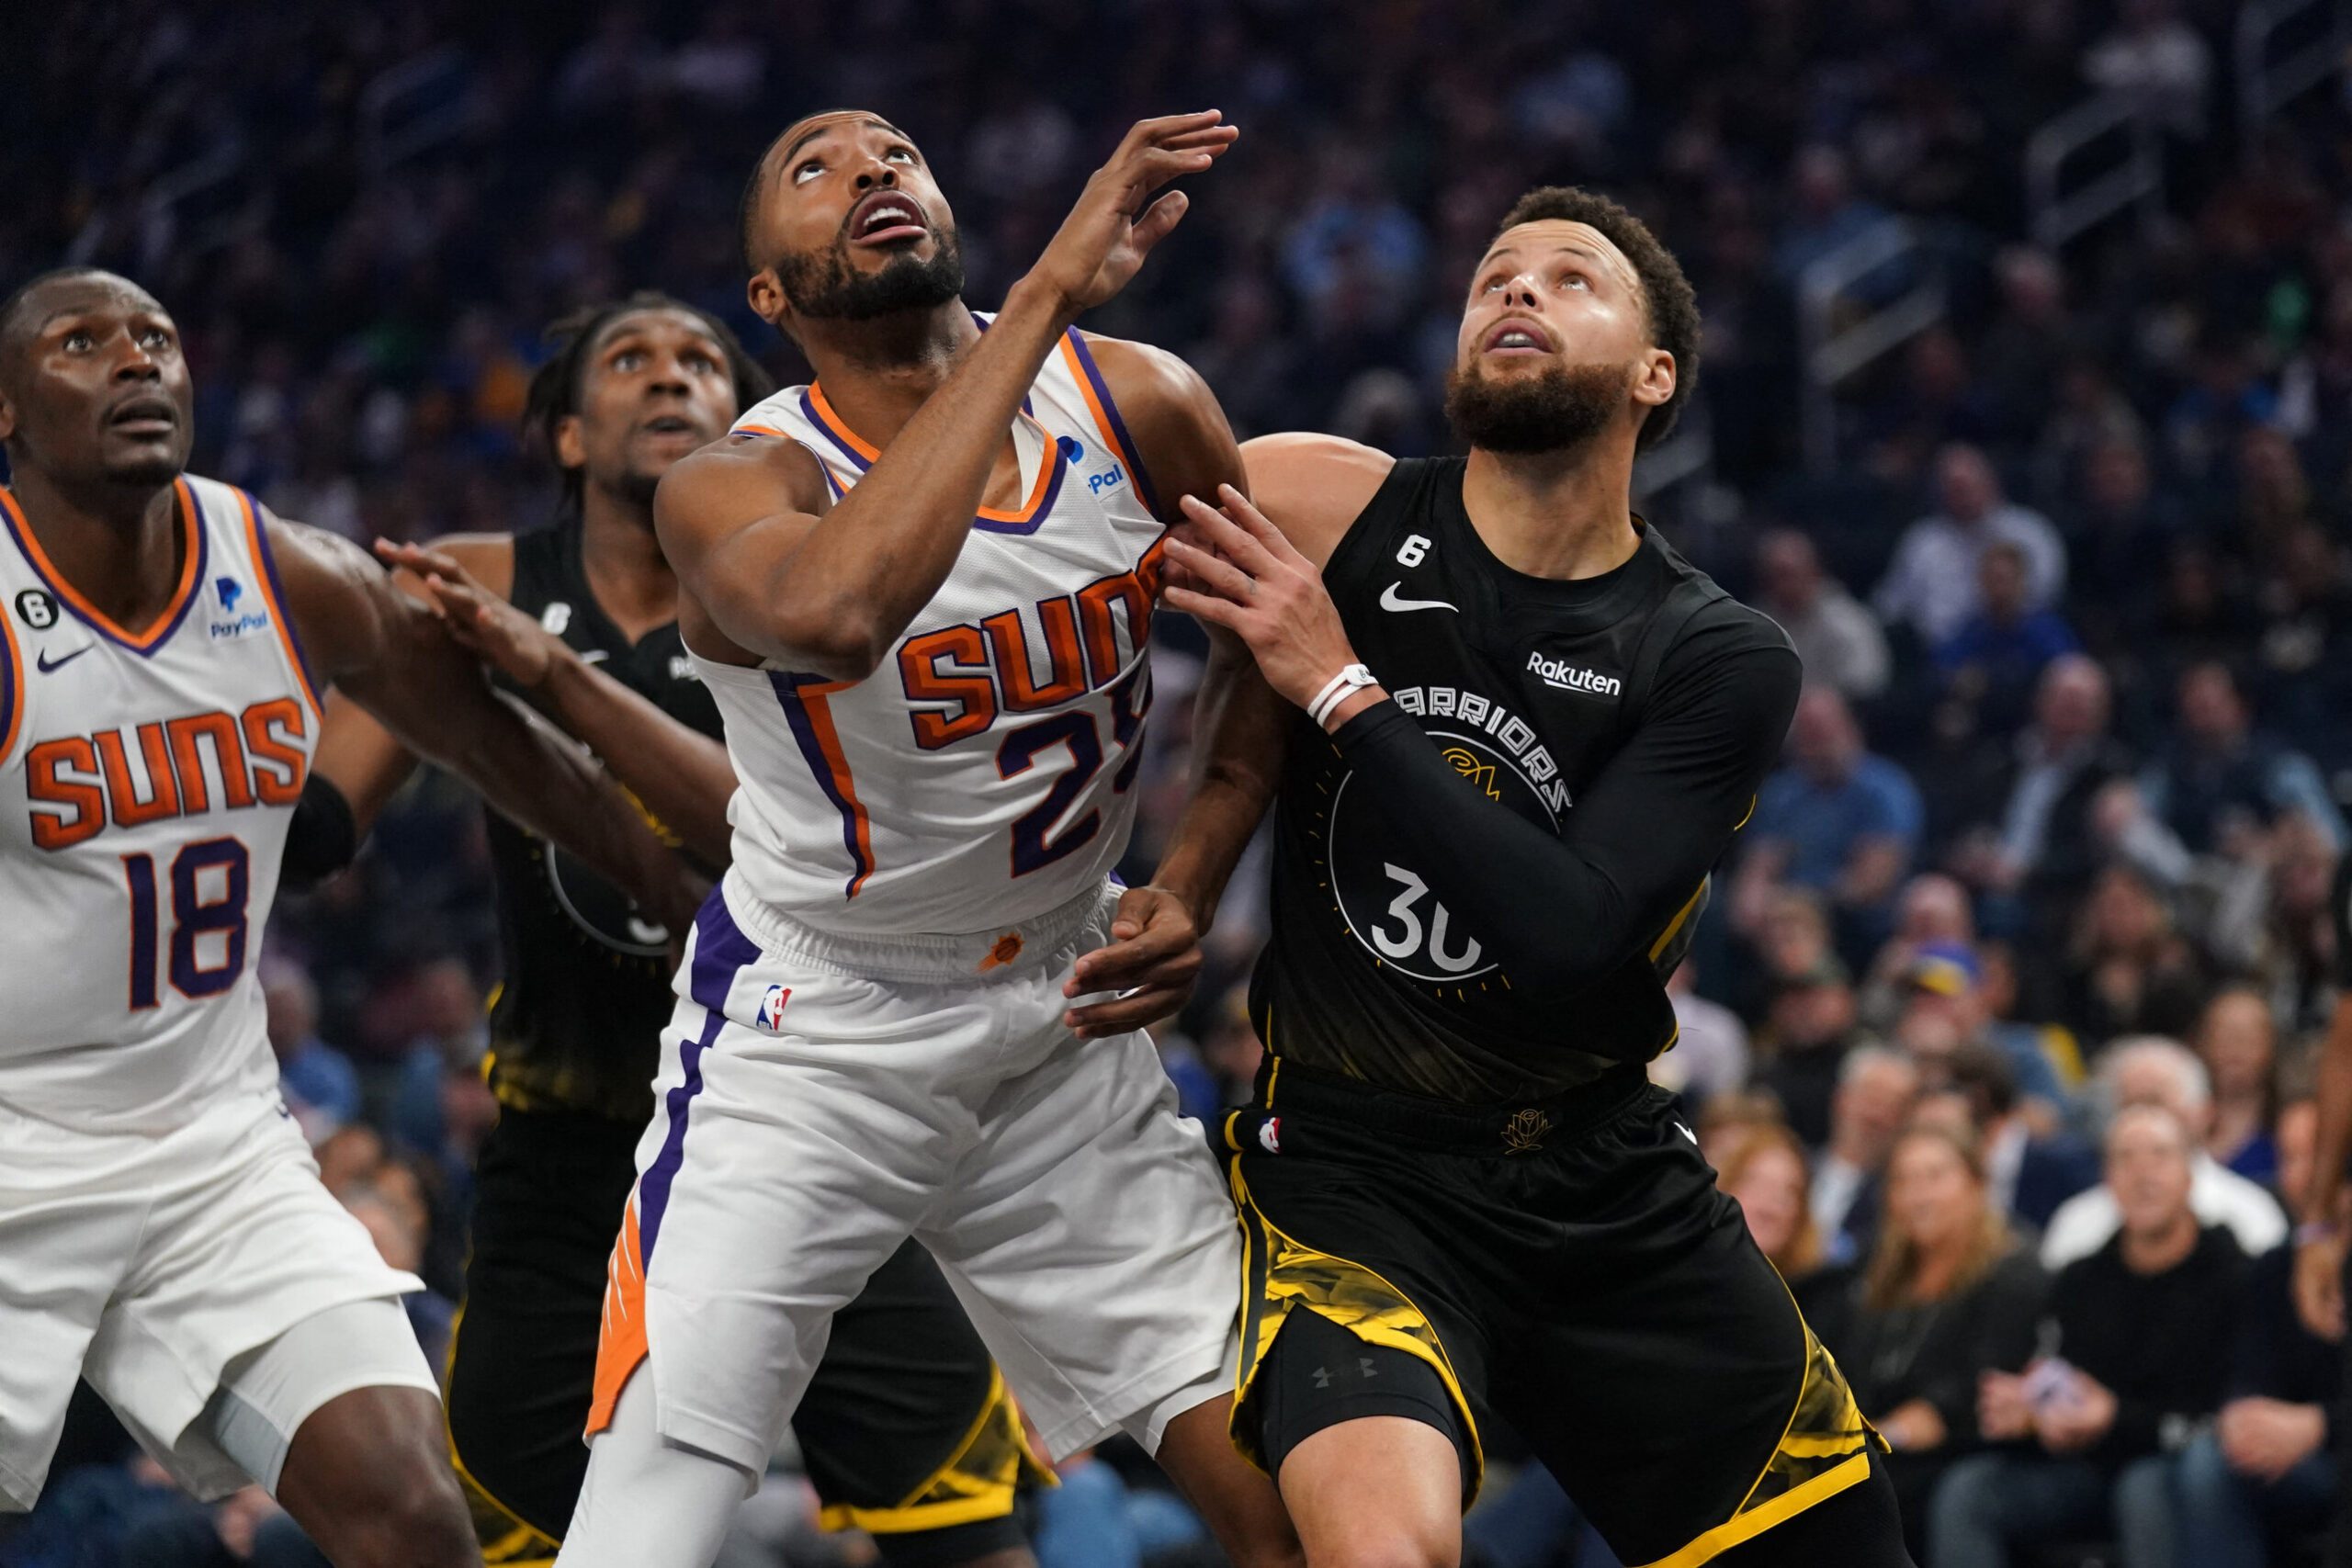 Suns spoil Stephen Curry’s return with win at Golden State